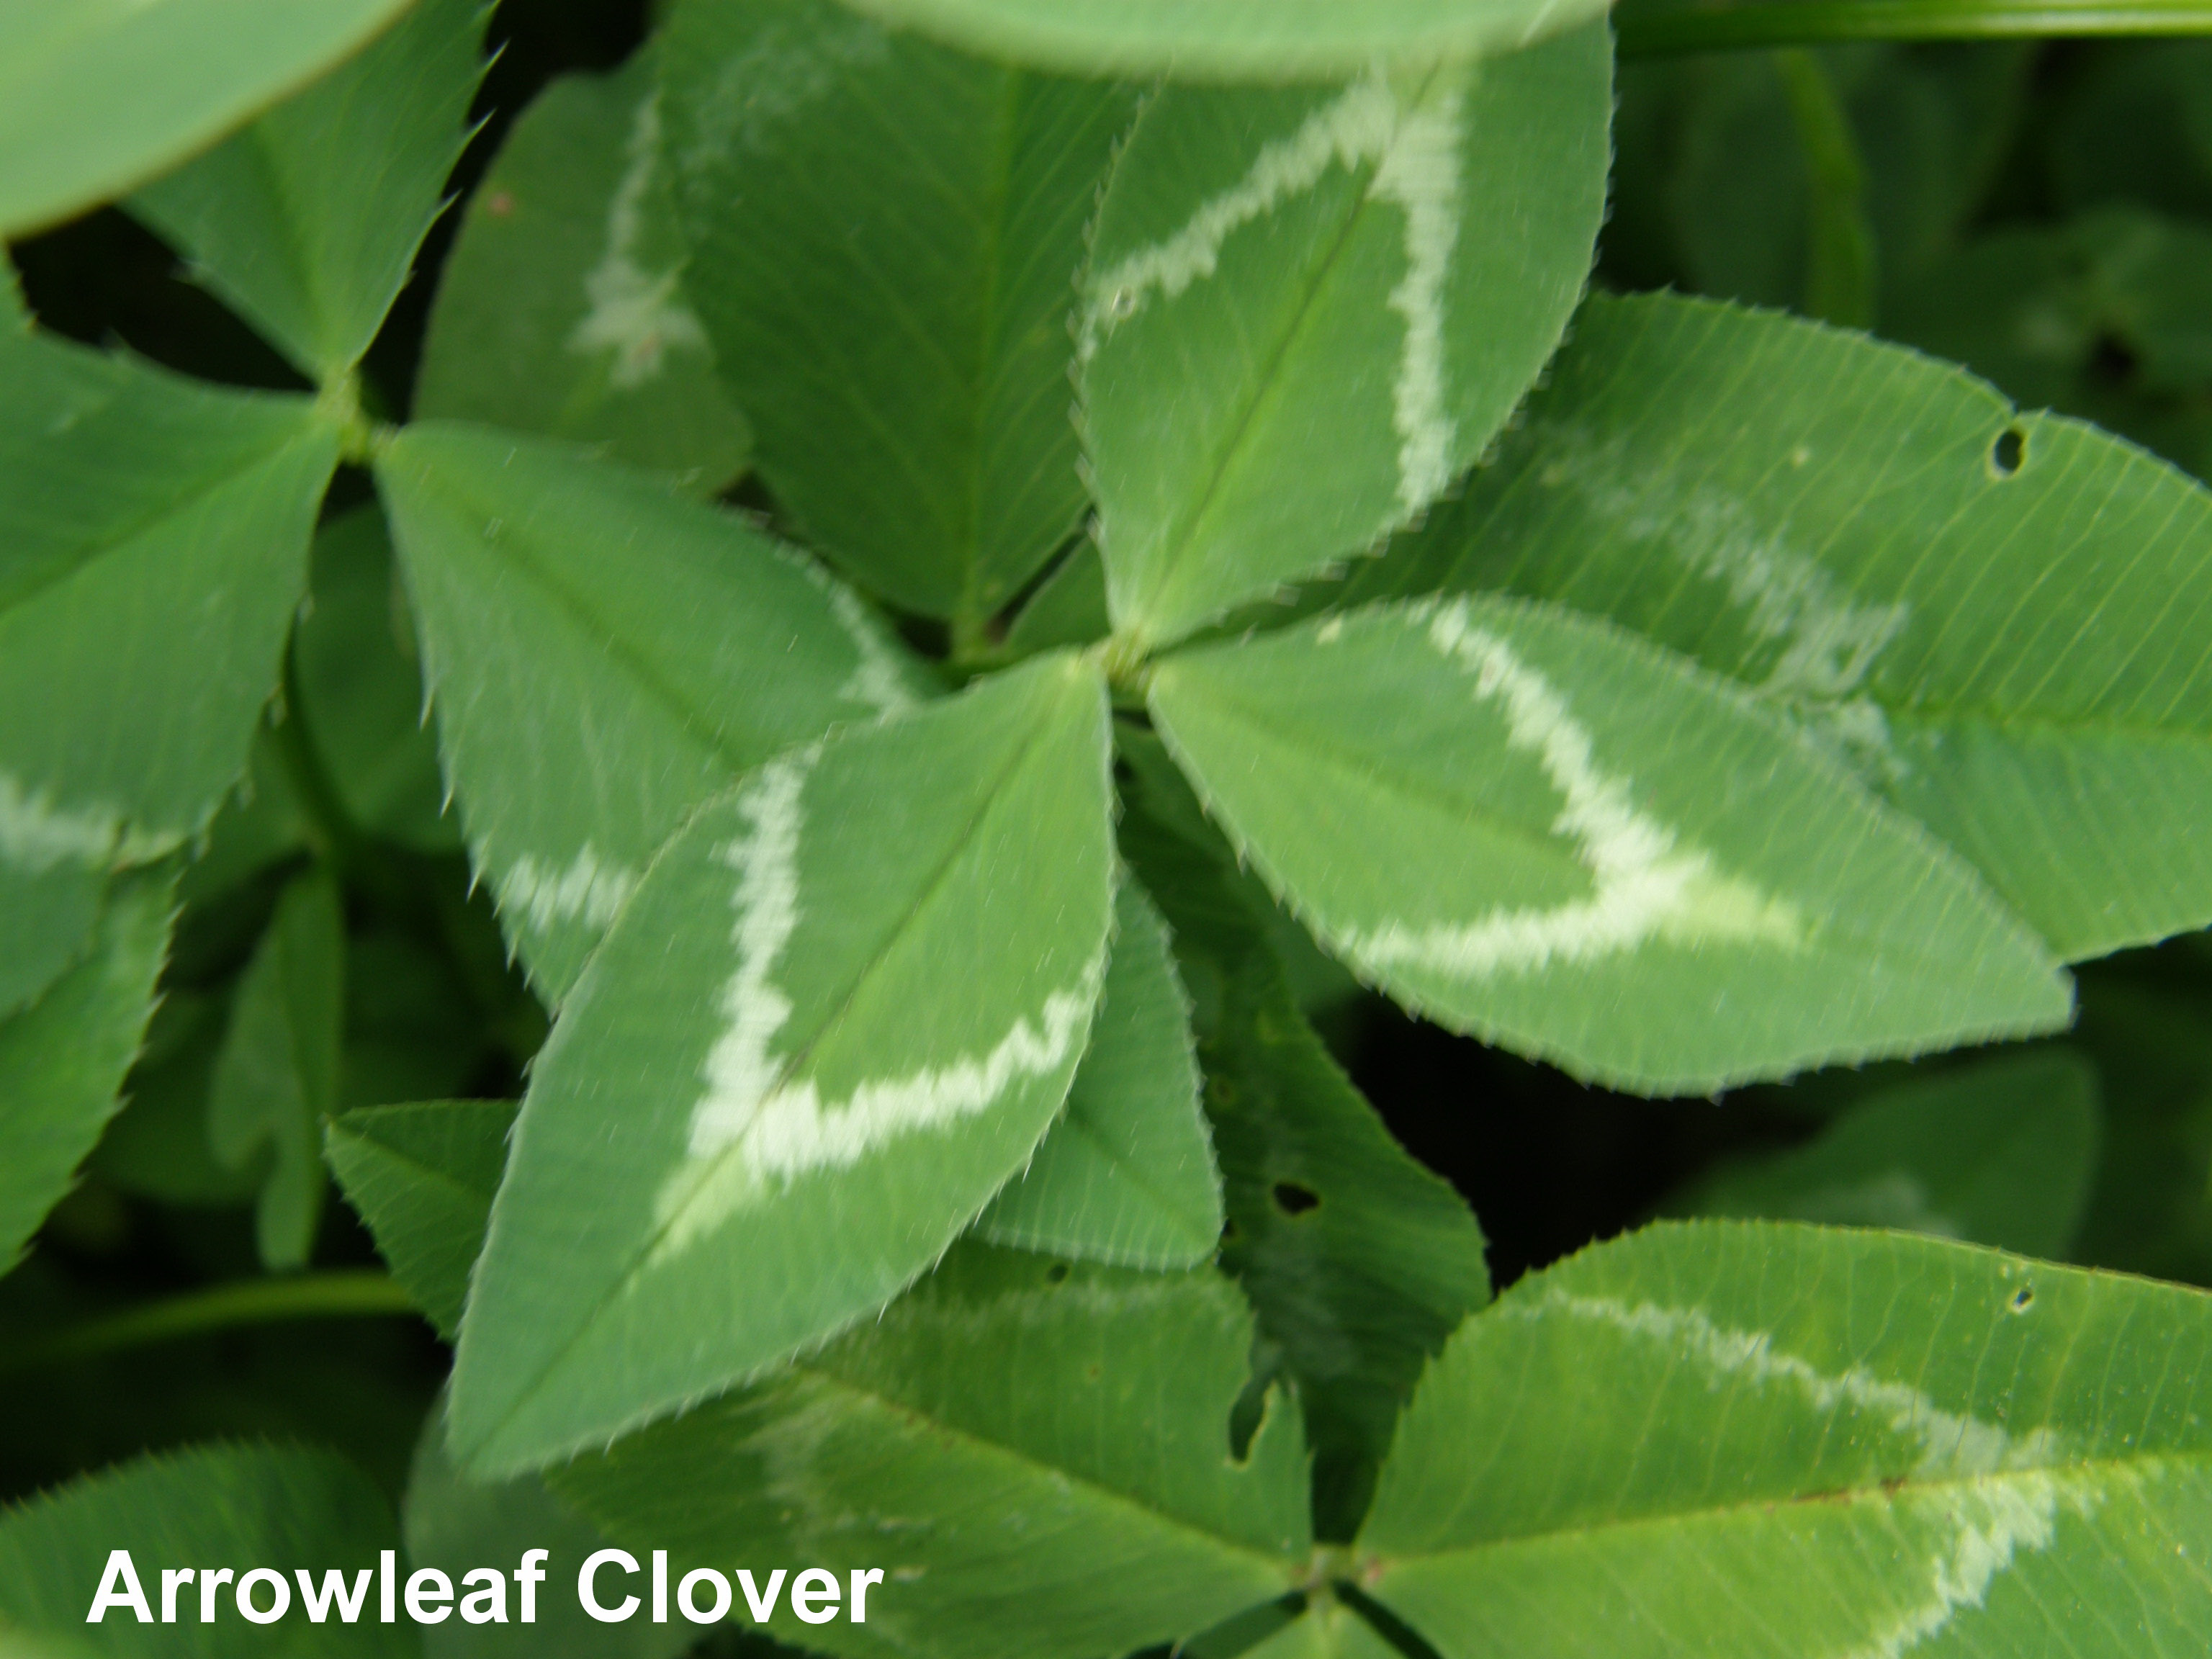 green clover with white markings in the shape of an arrow.